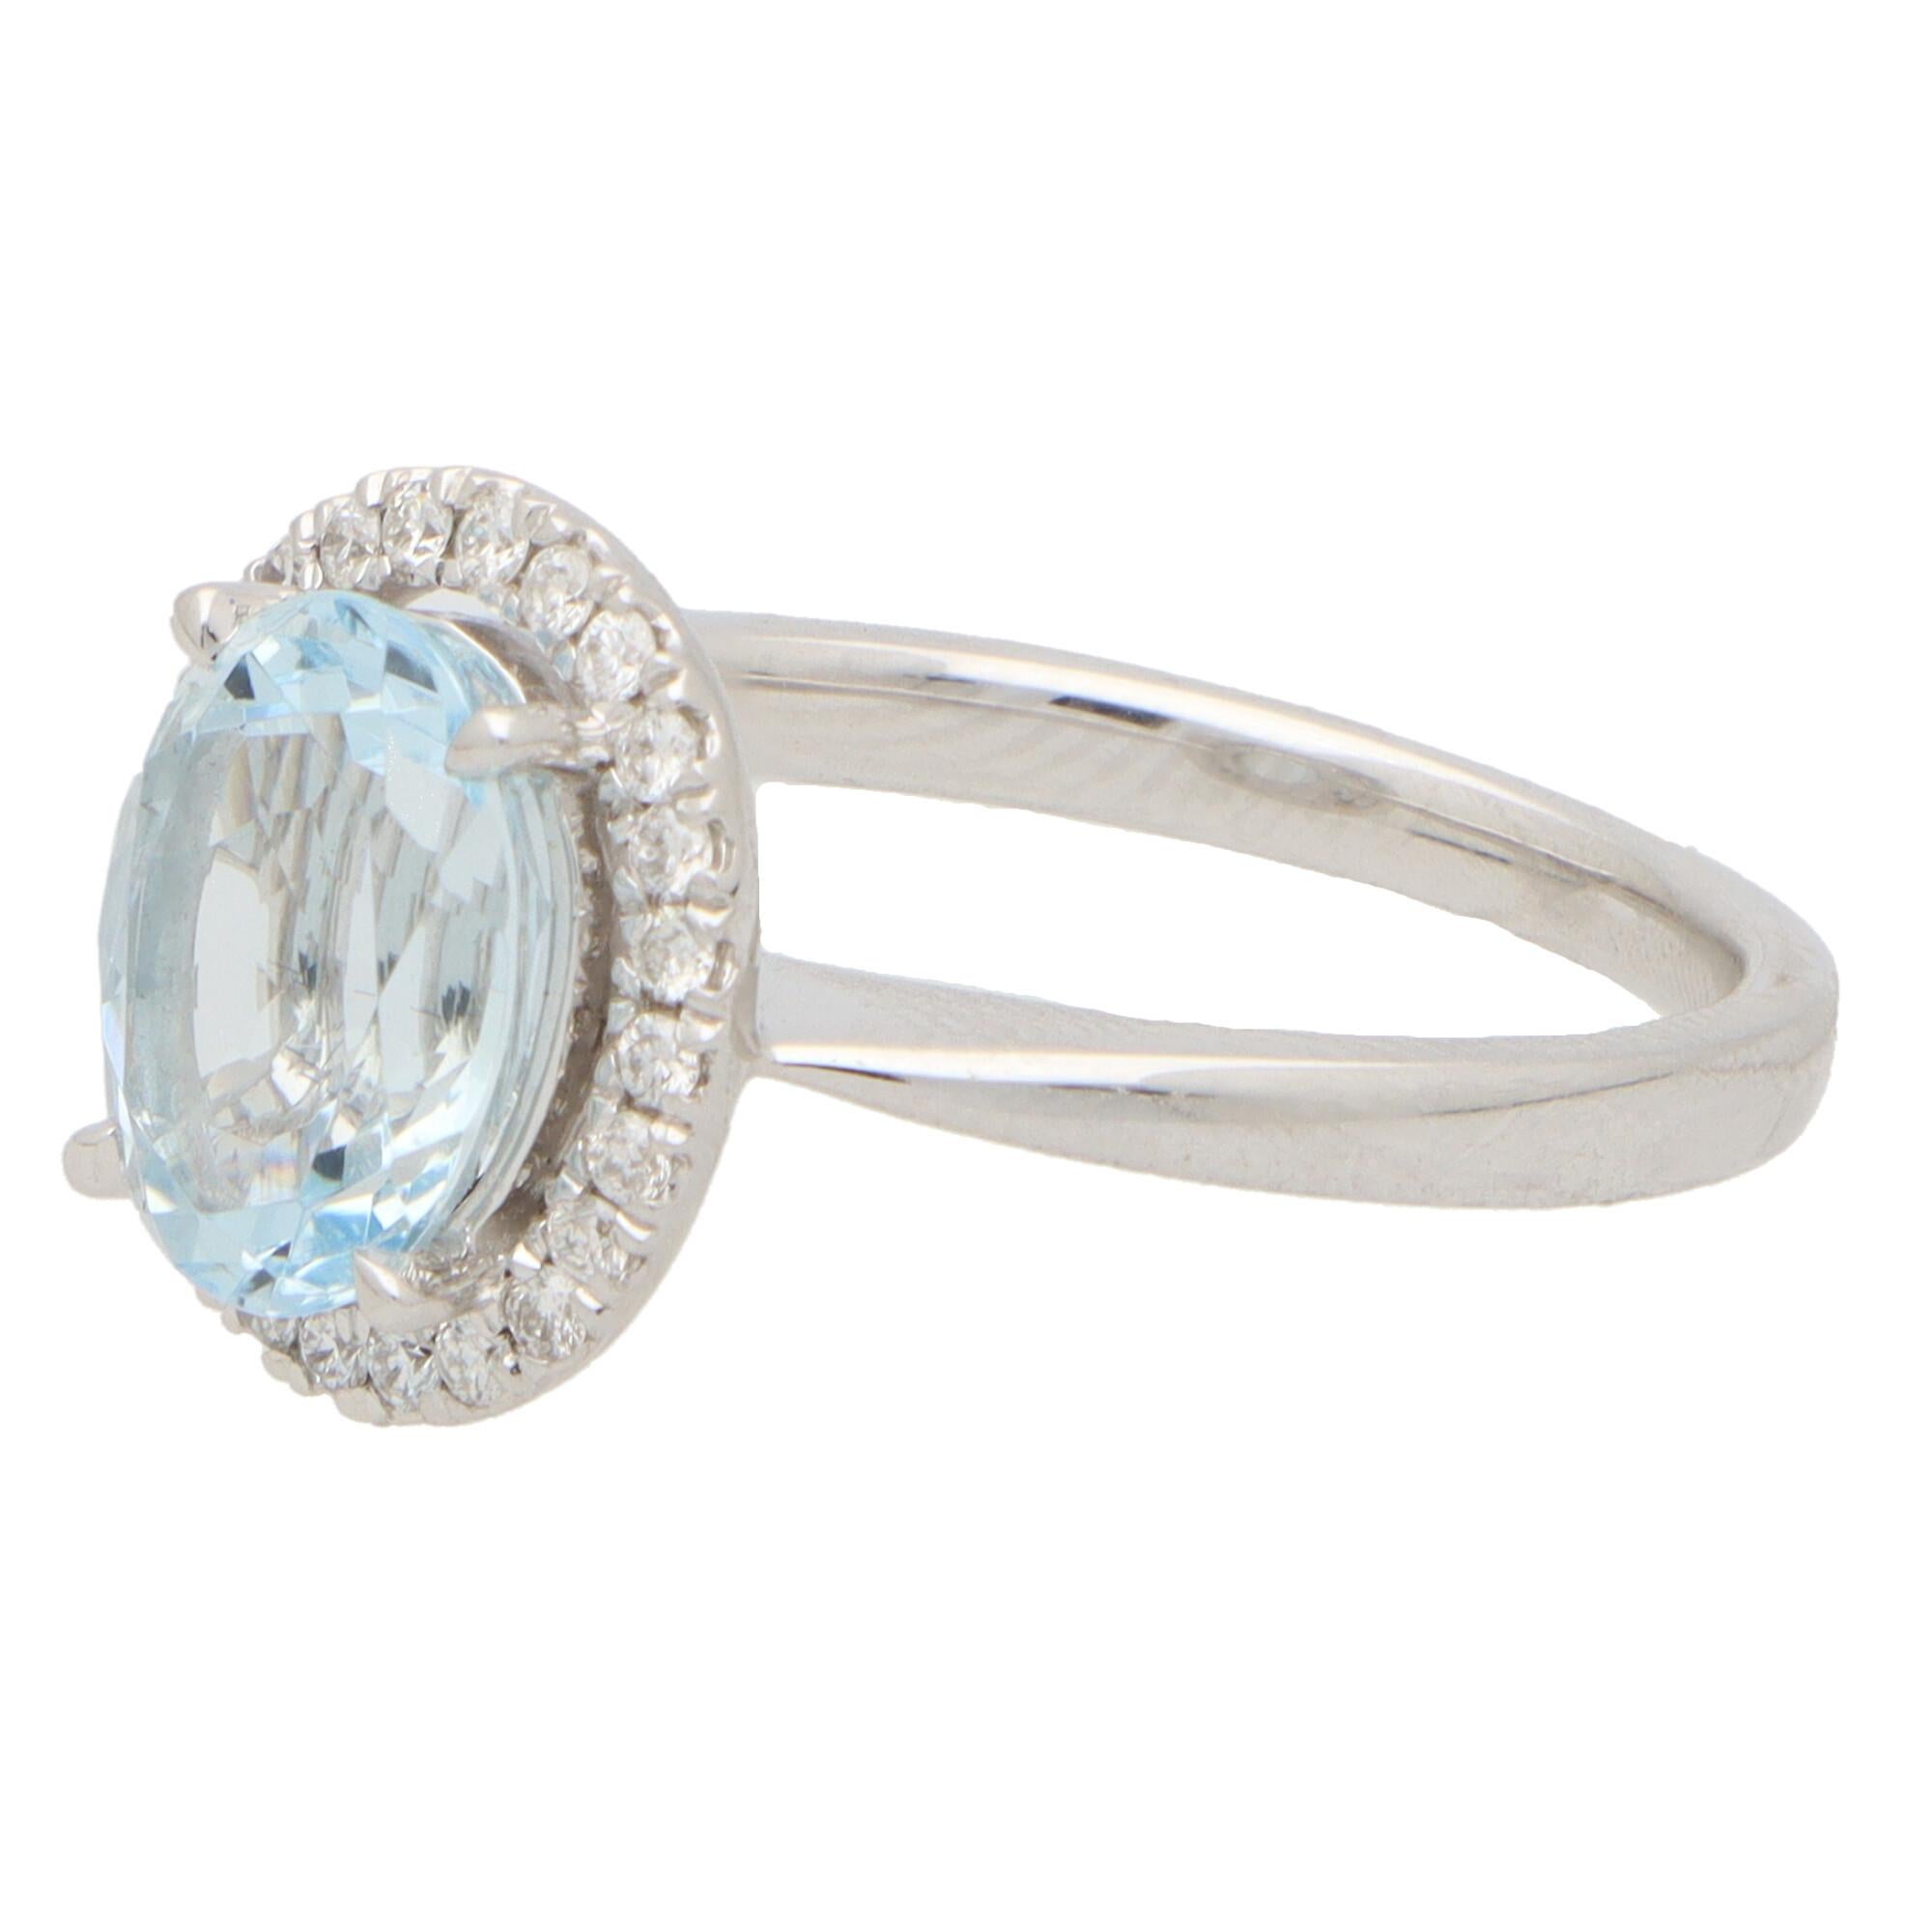 Oval Cut Aquamarine and Diamond Halo Cluster Ring Set in 18k White Gold